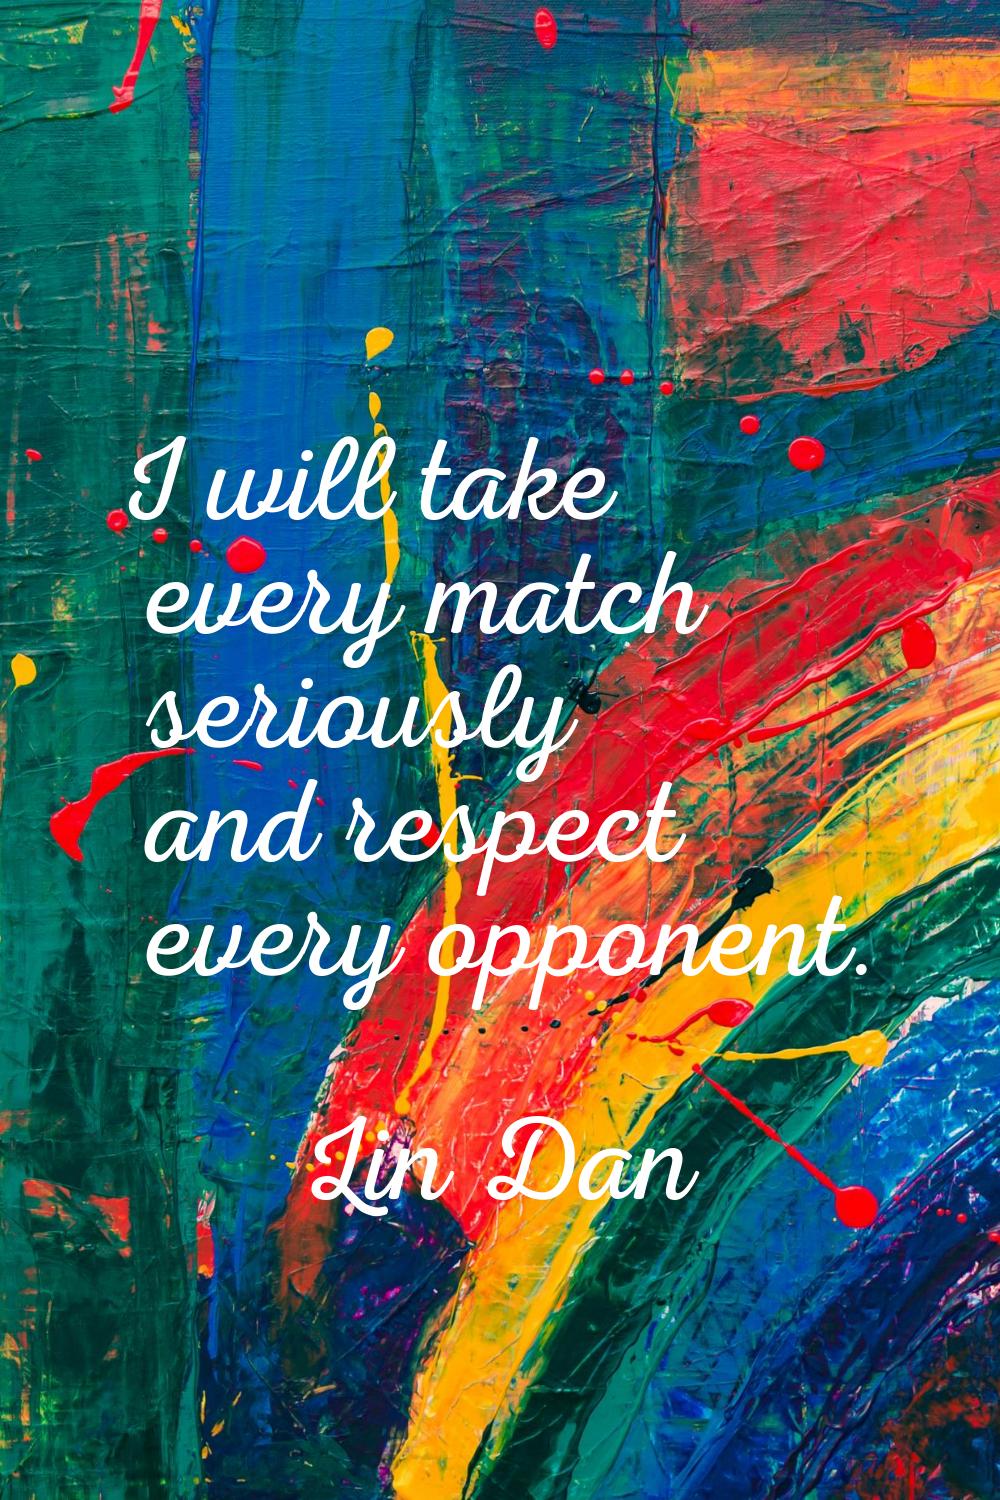 I will take every match seriously and respect every opponent.